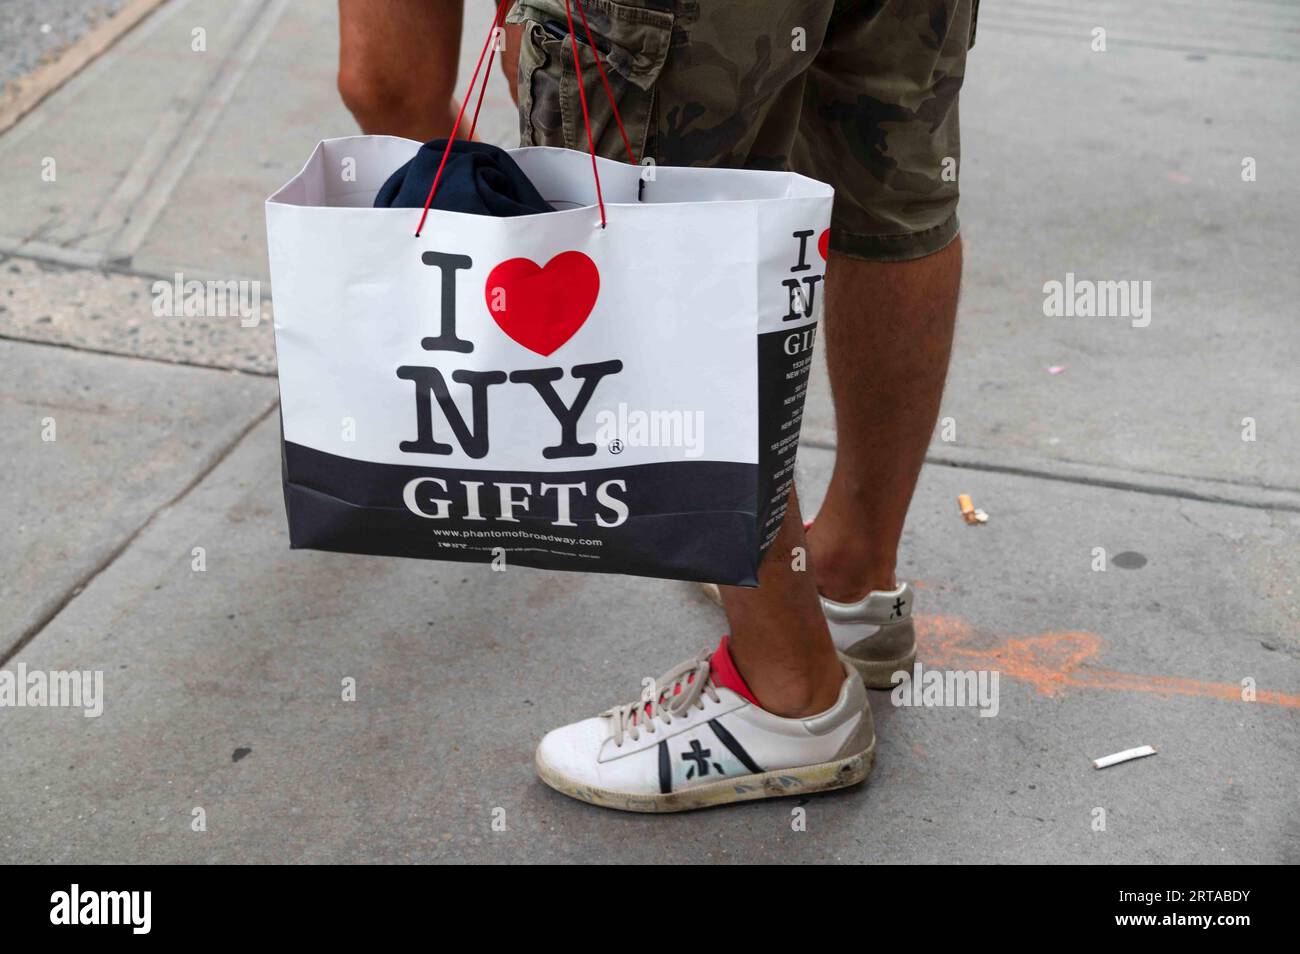 A man in a sidewalk wearing sneakers with I heart NY souvenir gift bag Stock Photo